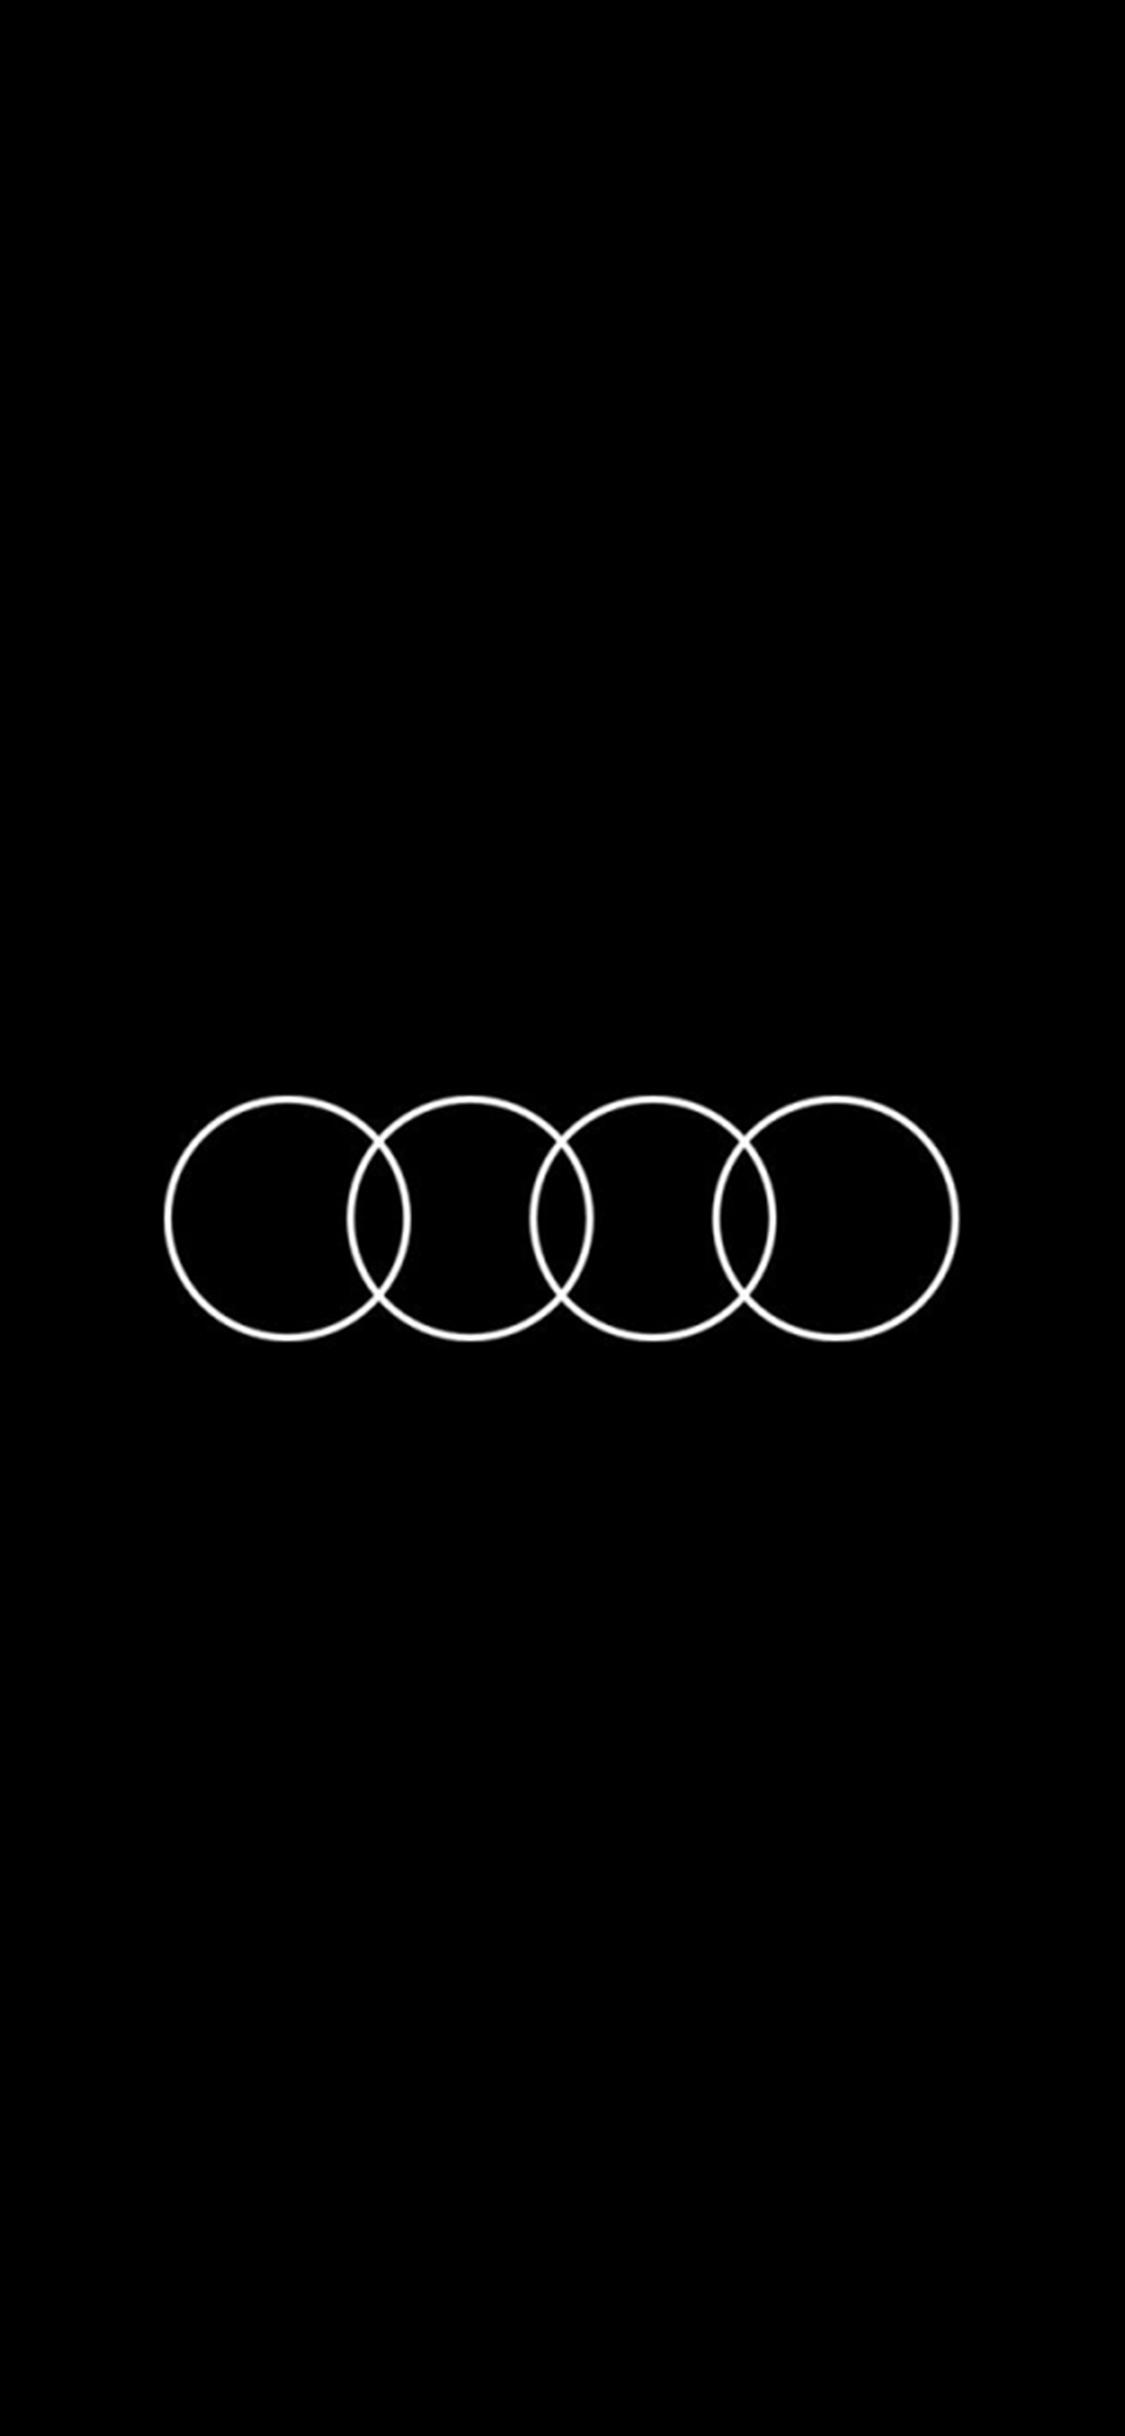 Audi Logo Iphone Wallpapers. Download free image and pictures